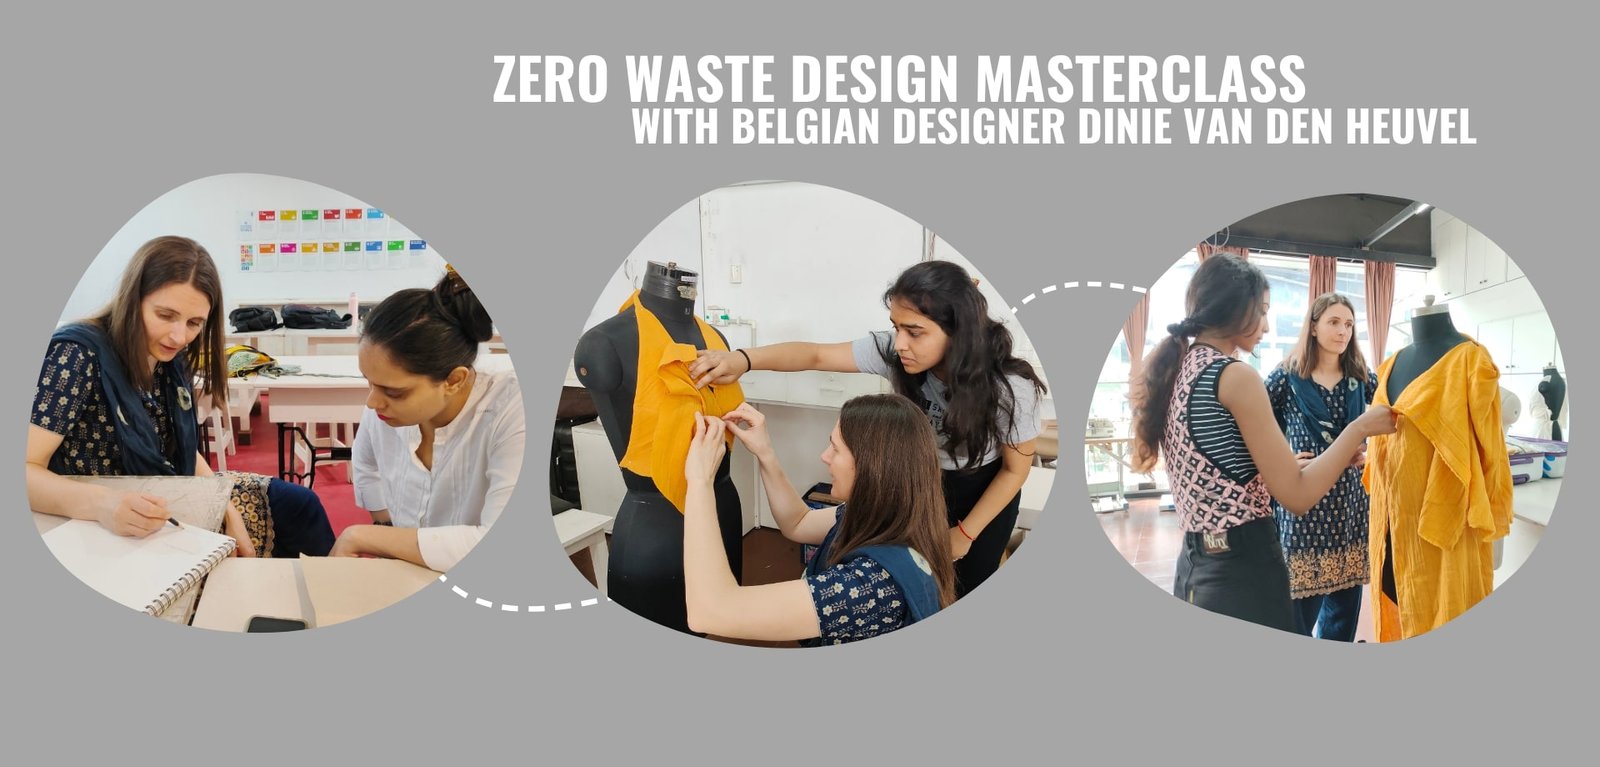 Explore the world of design with our Fashion Design Course in Kolkata. Enroll today for a holistic learning experience and industry readiness